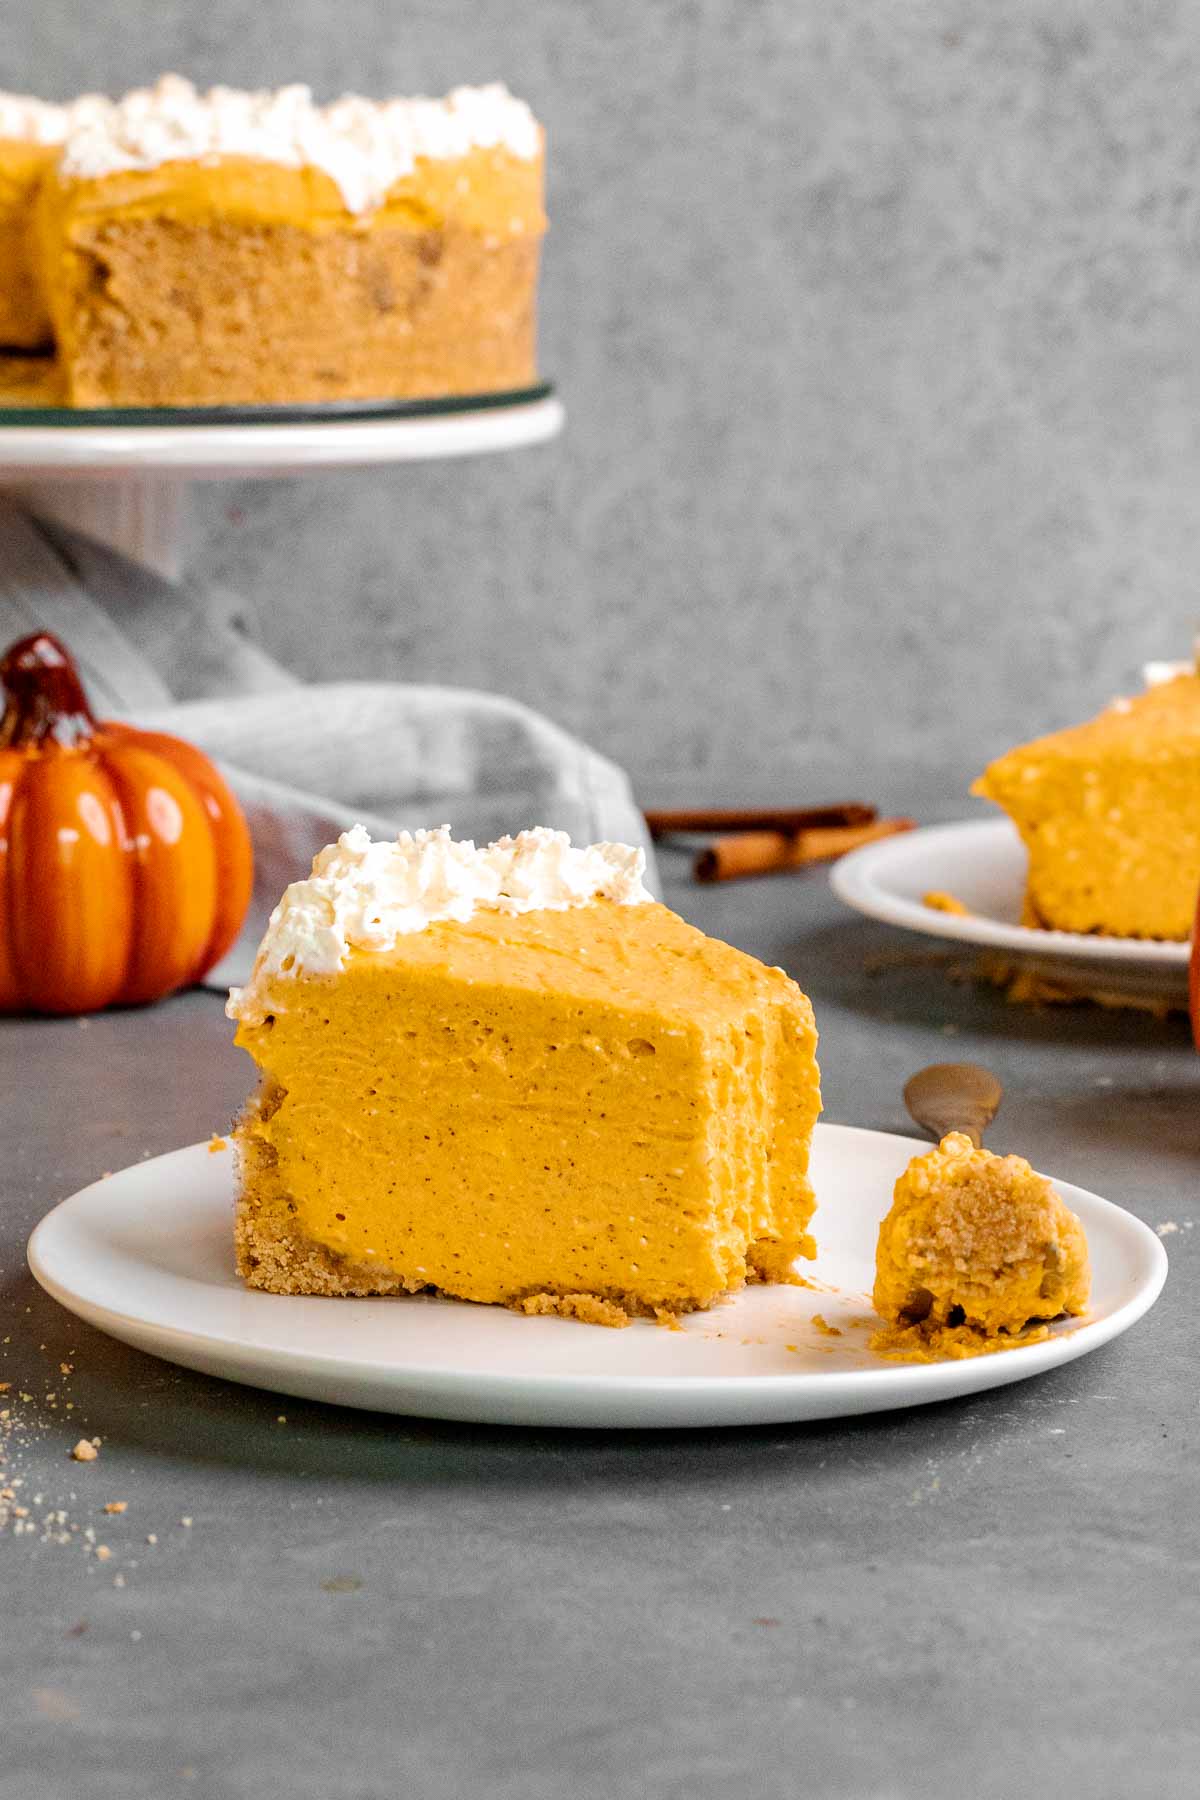 Slice of no-bake Pumpkin Cheesecake served on a plate.